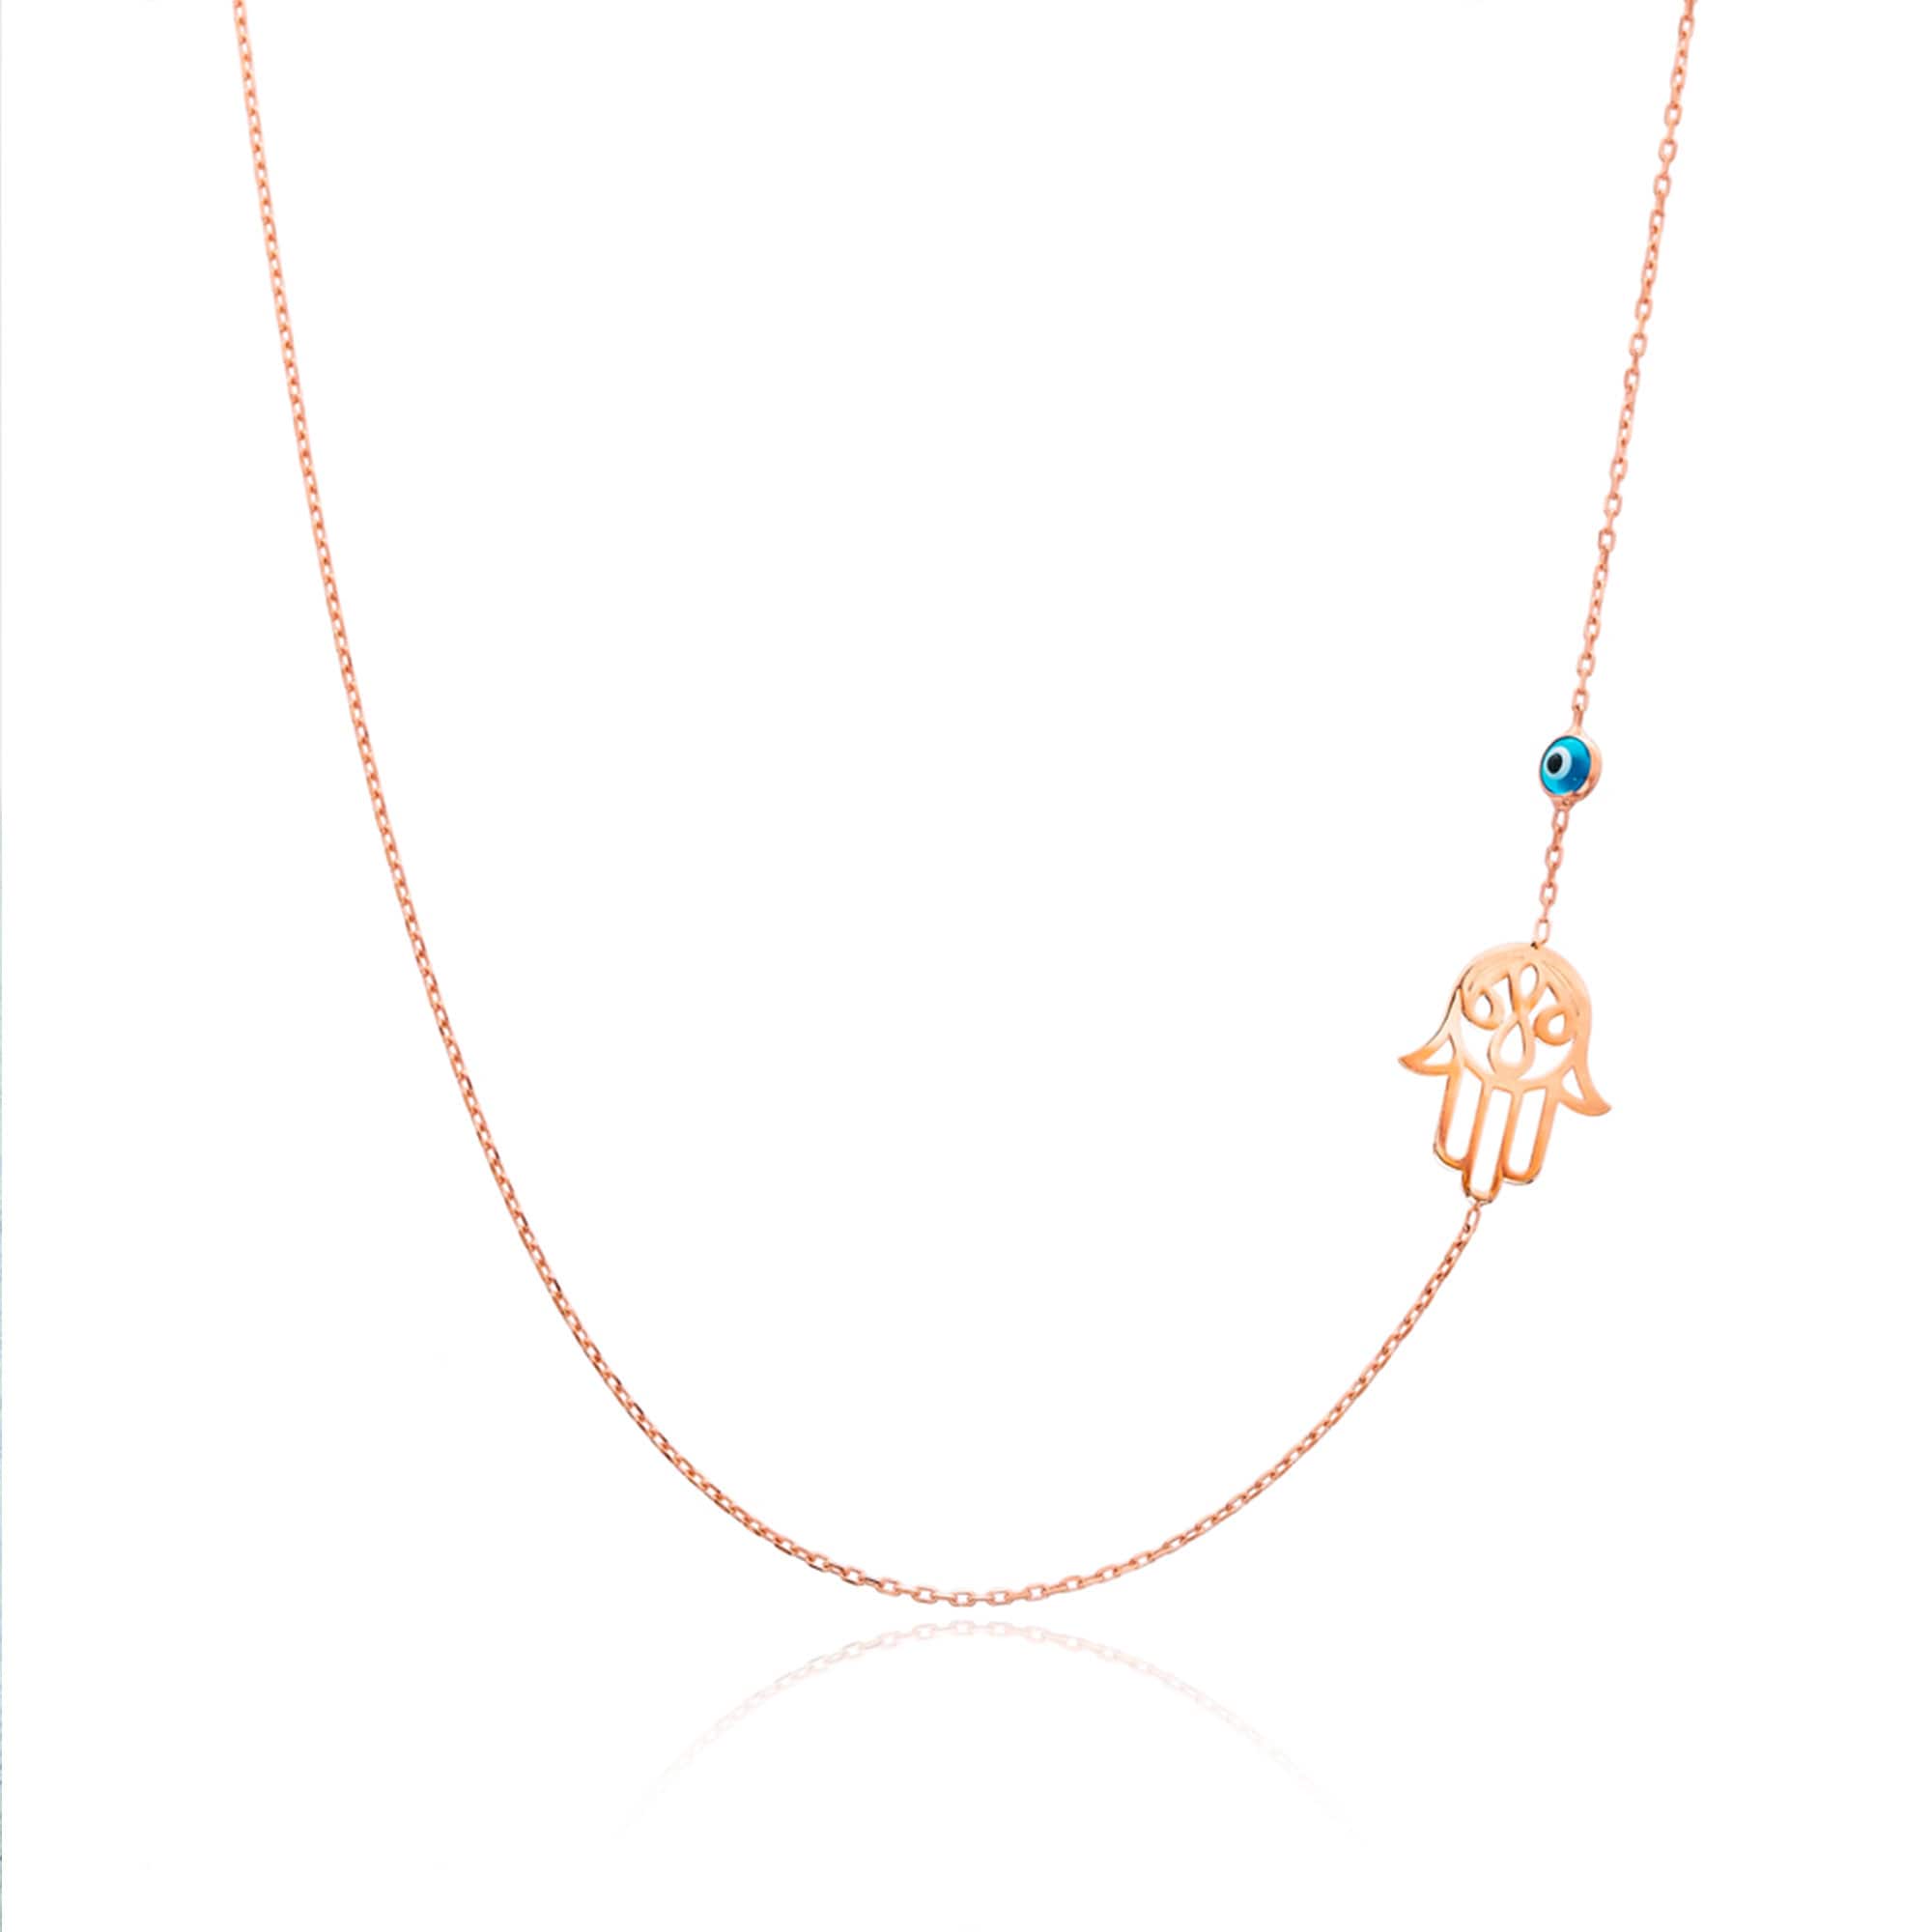 Slidable Necklace Extension Chain, Hamsa Hand